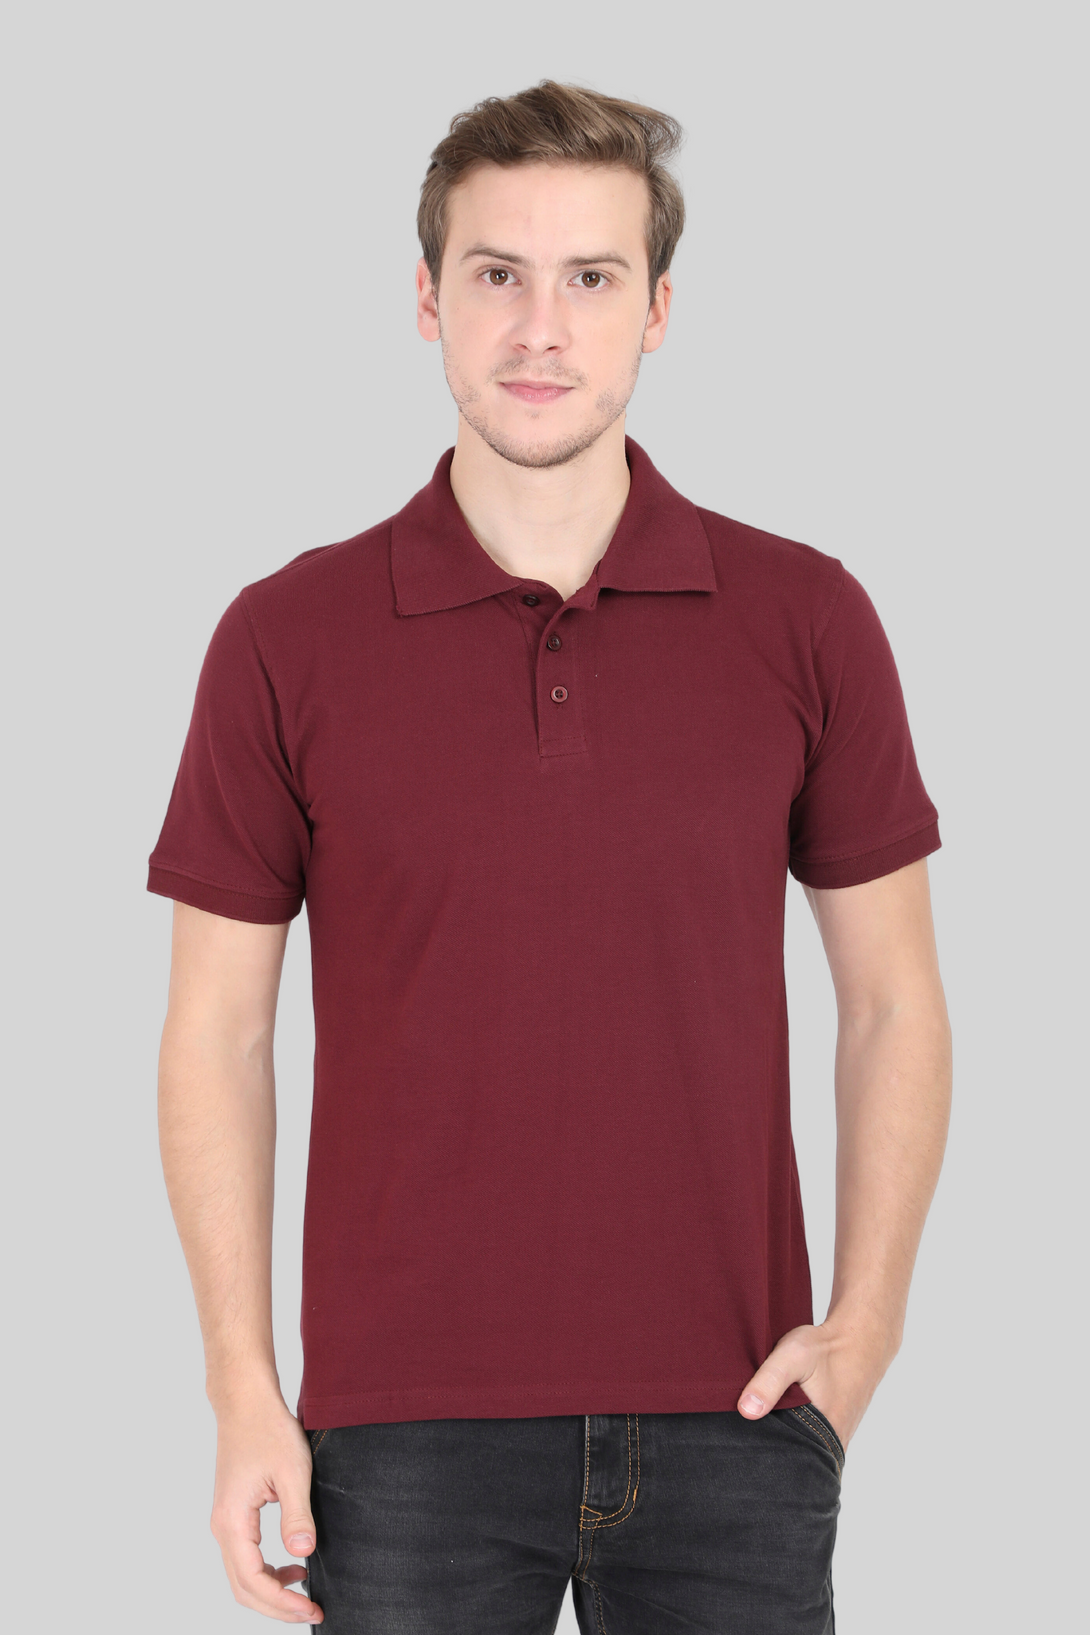 Maroon Polo T-Shirt For Men - WowWaves - 1